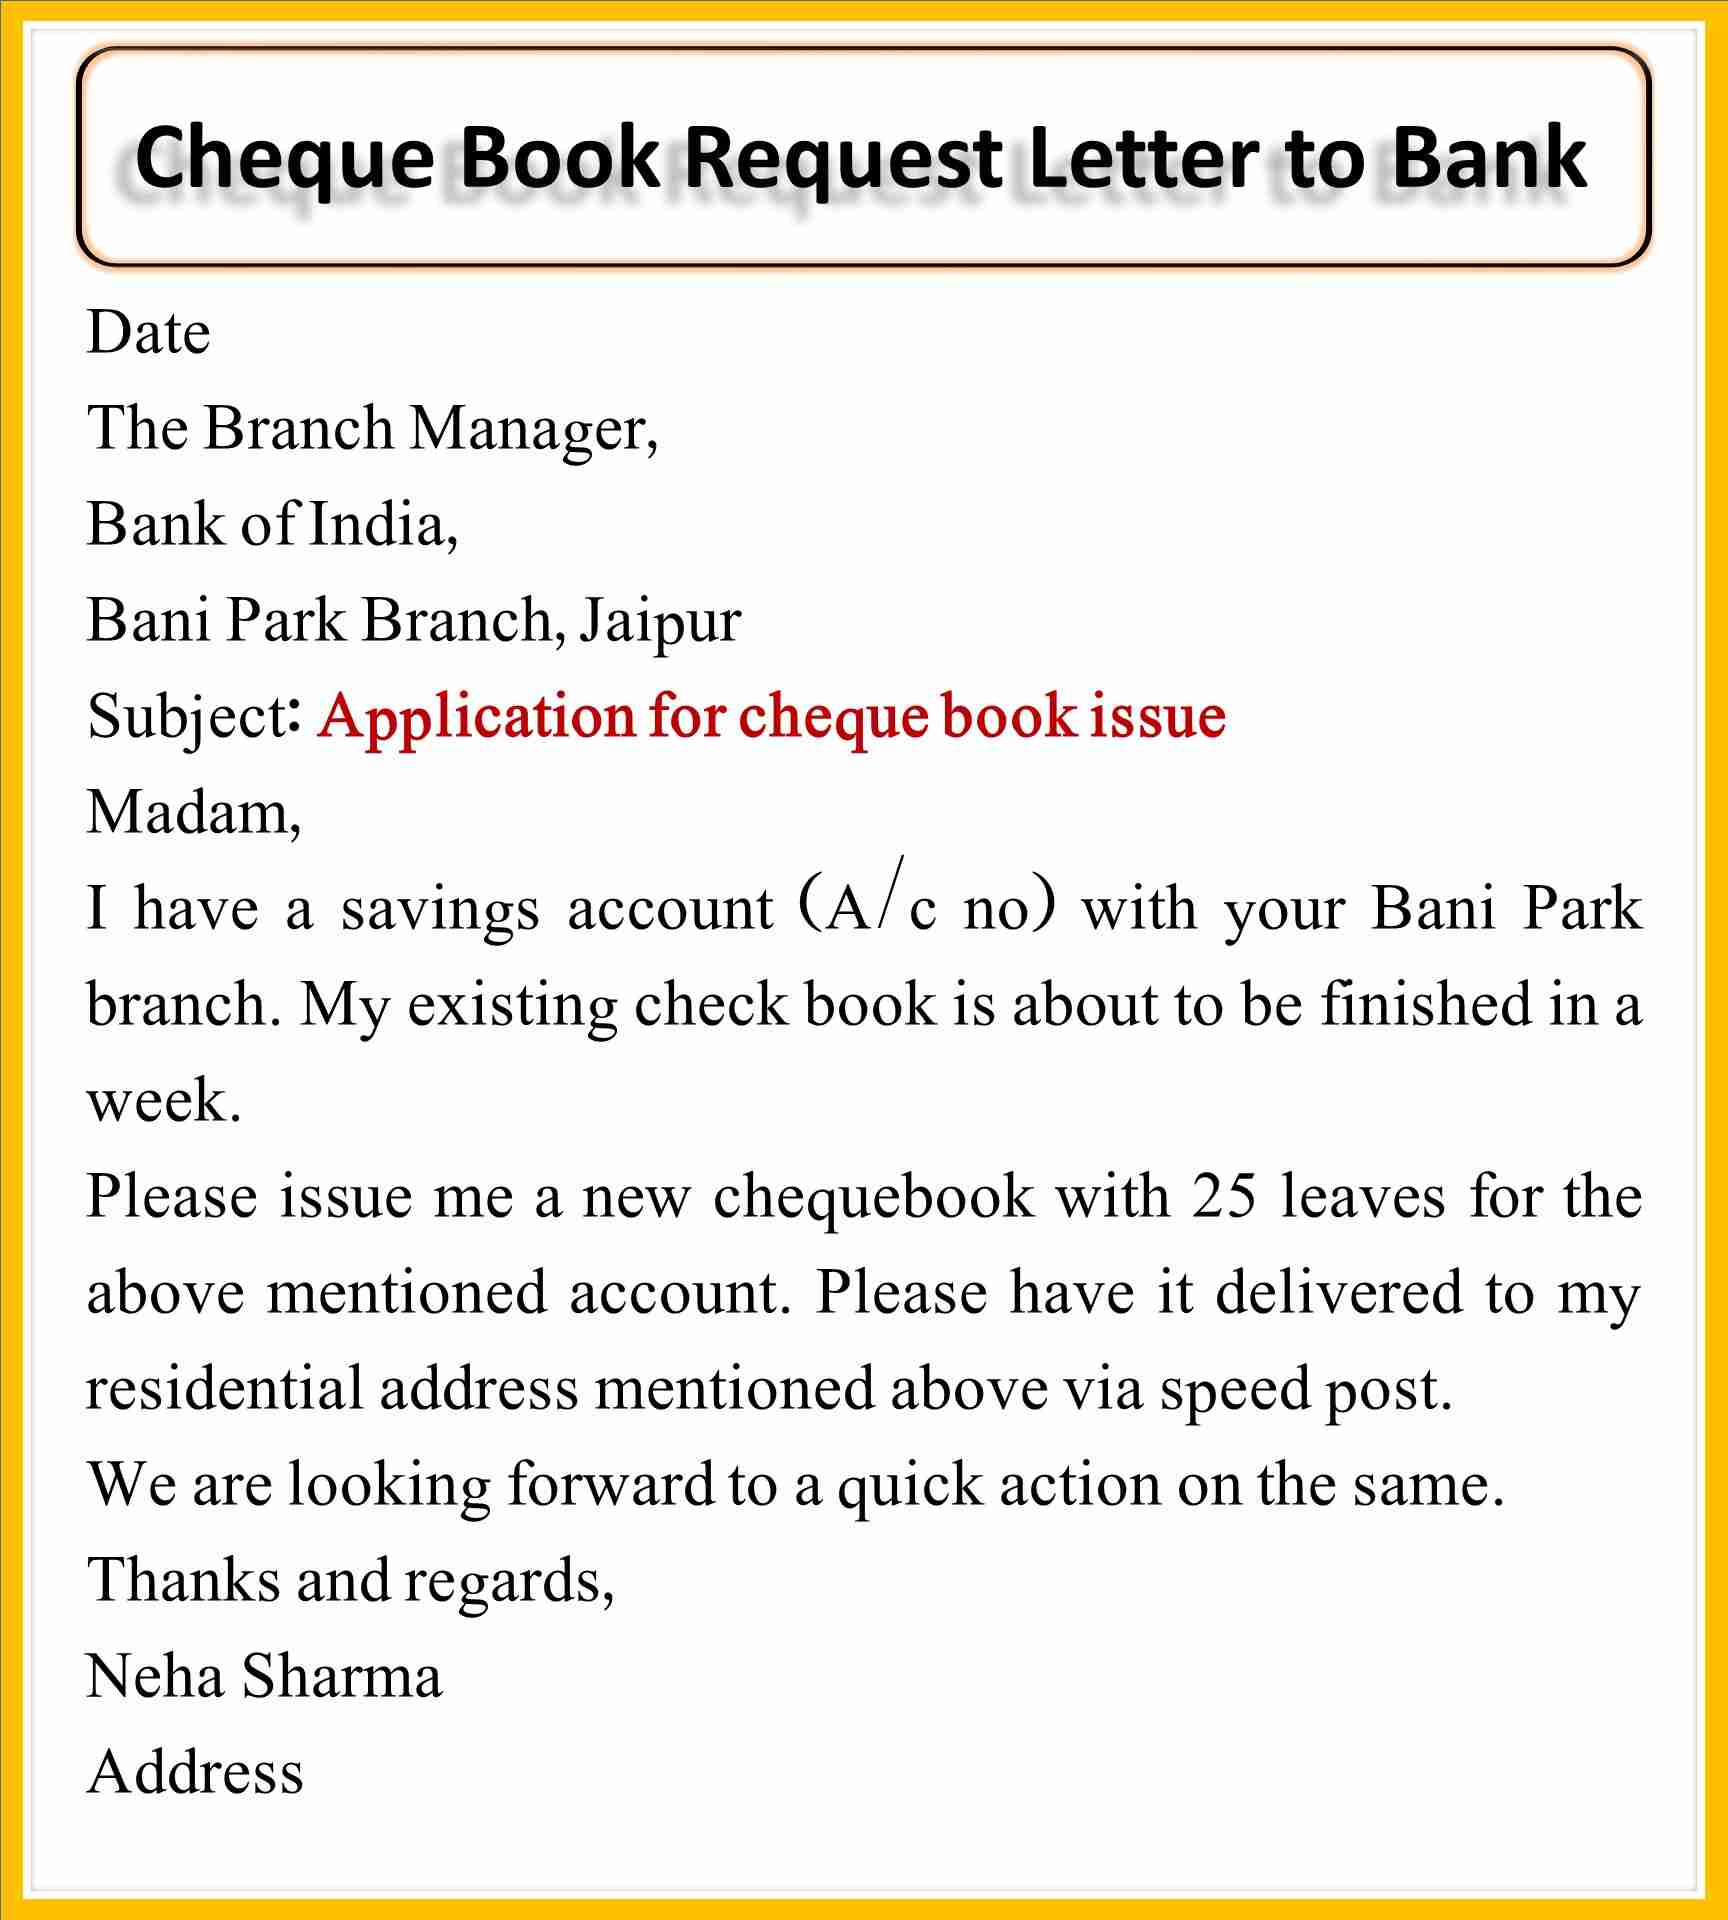 Application for Cheque Book Issue in English